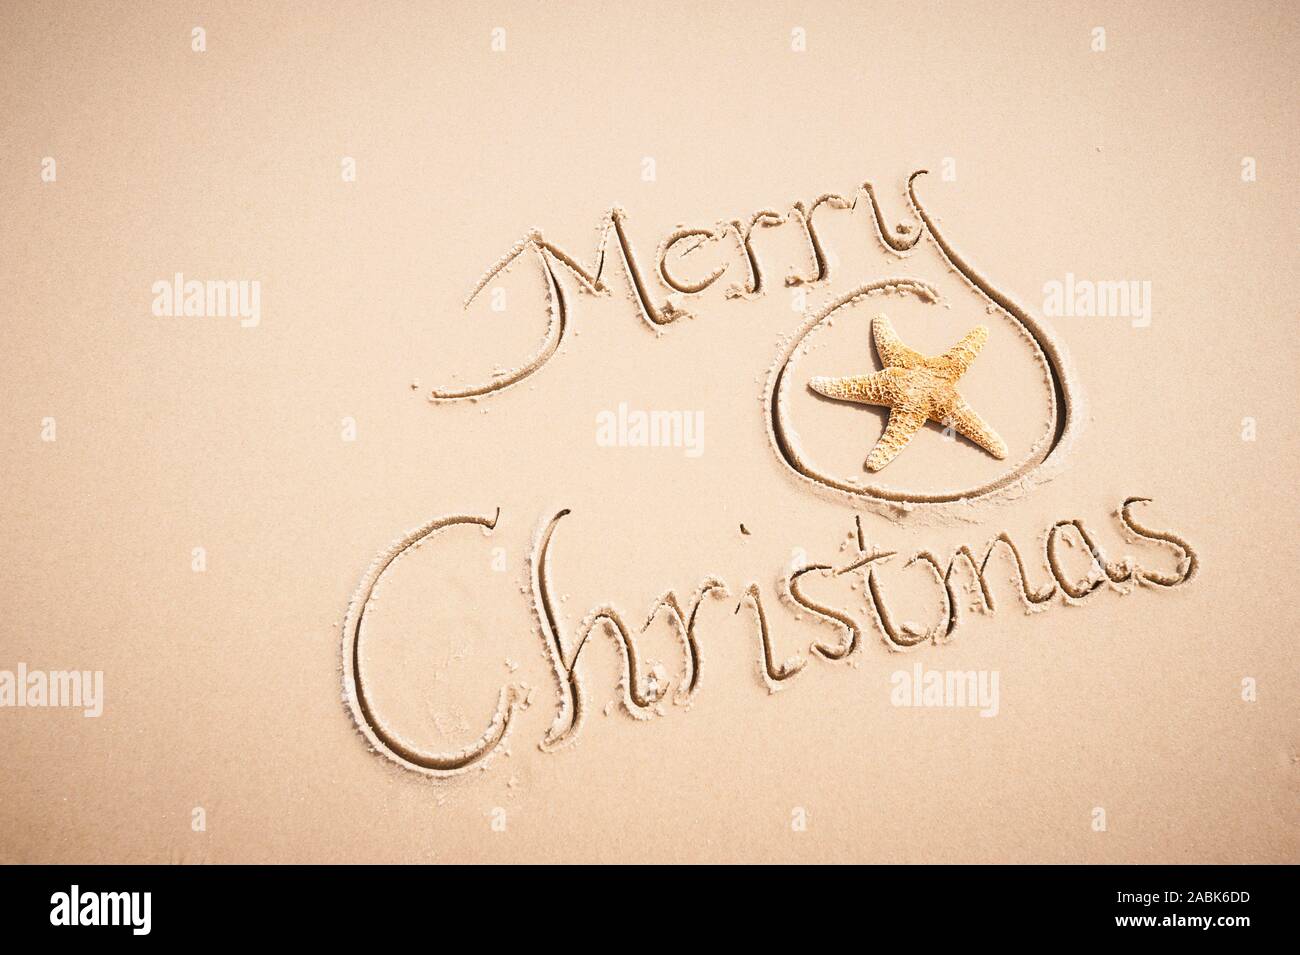 Merry Christmas message handwritten on the shore of a sunny beach with smooth sand copy space Stock Photo